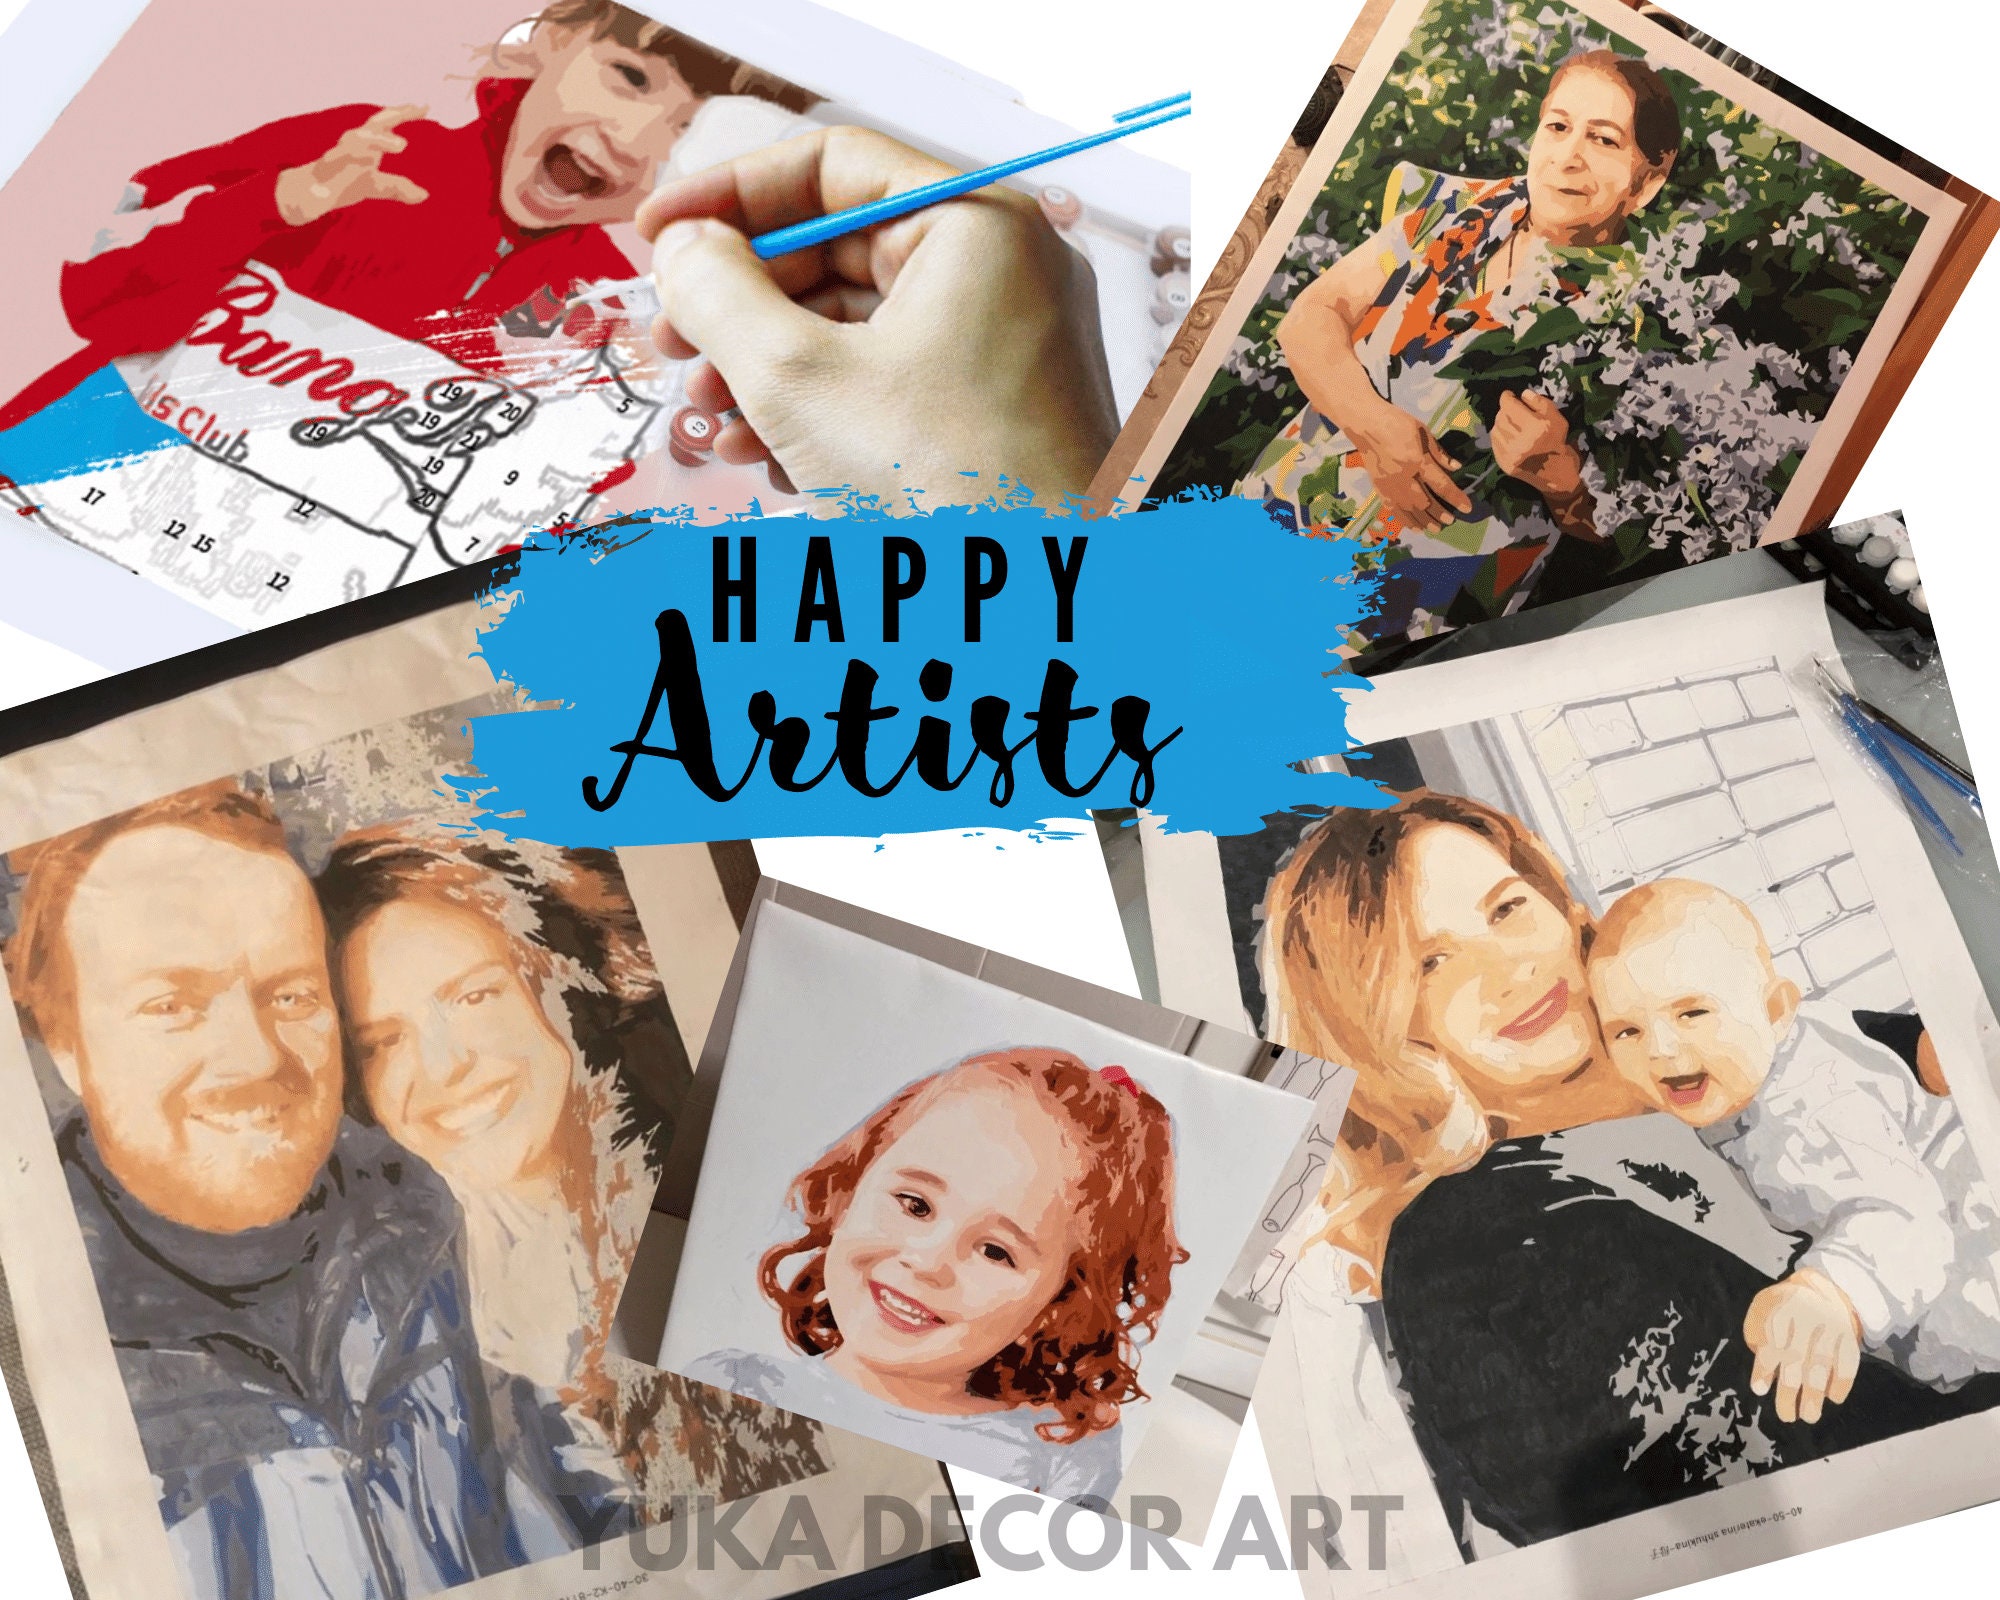 These custom photo paint-by-number art kits are the coolest gift